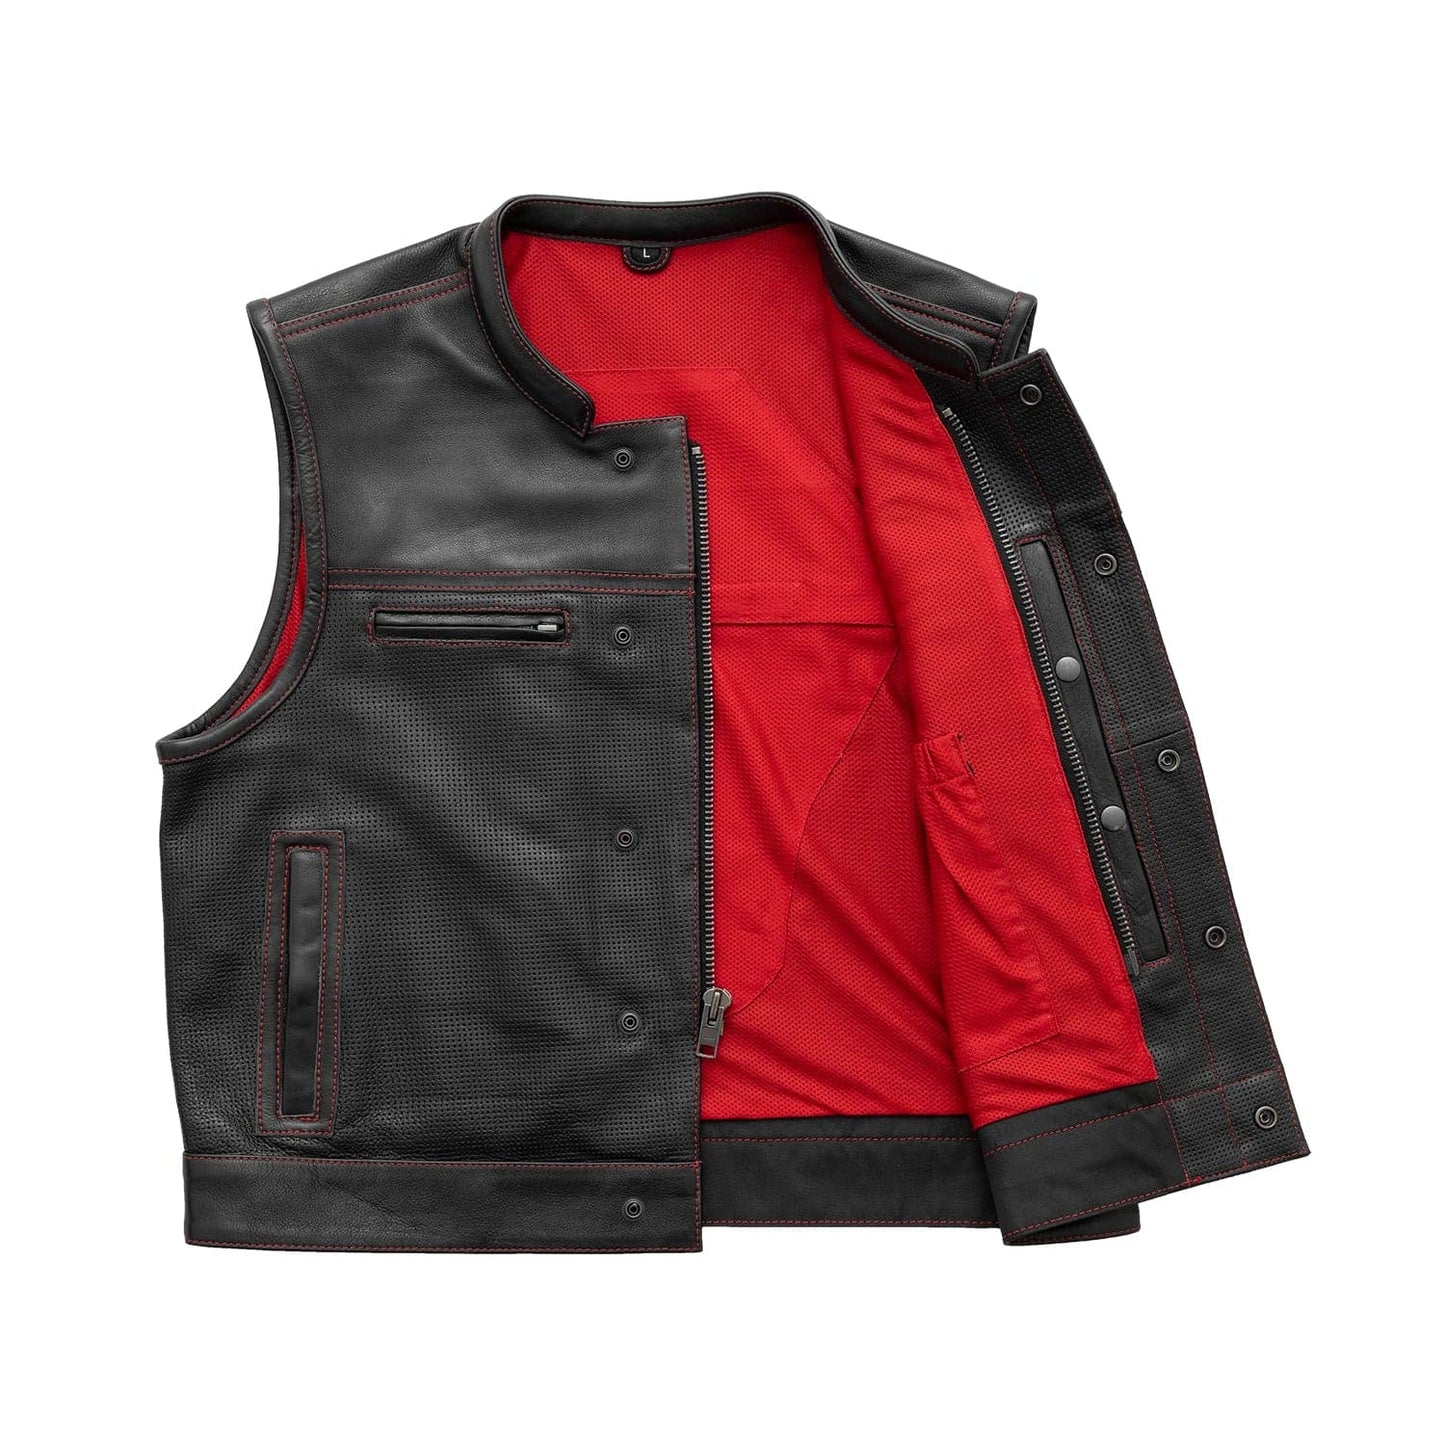 Lowrider Perforated Men's Leather Vest Men's Leather Vest First Manufacturing Company   